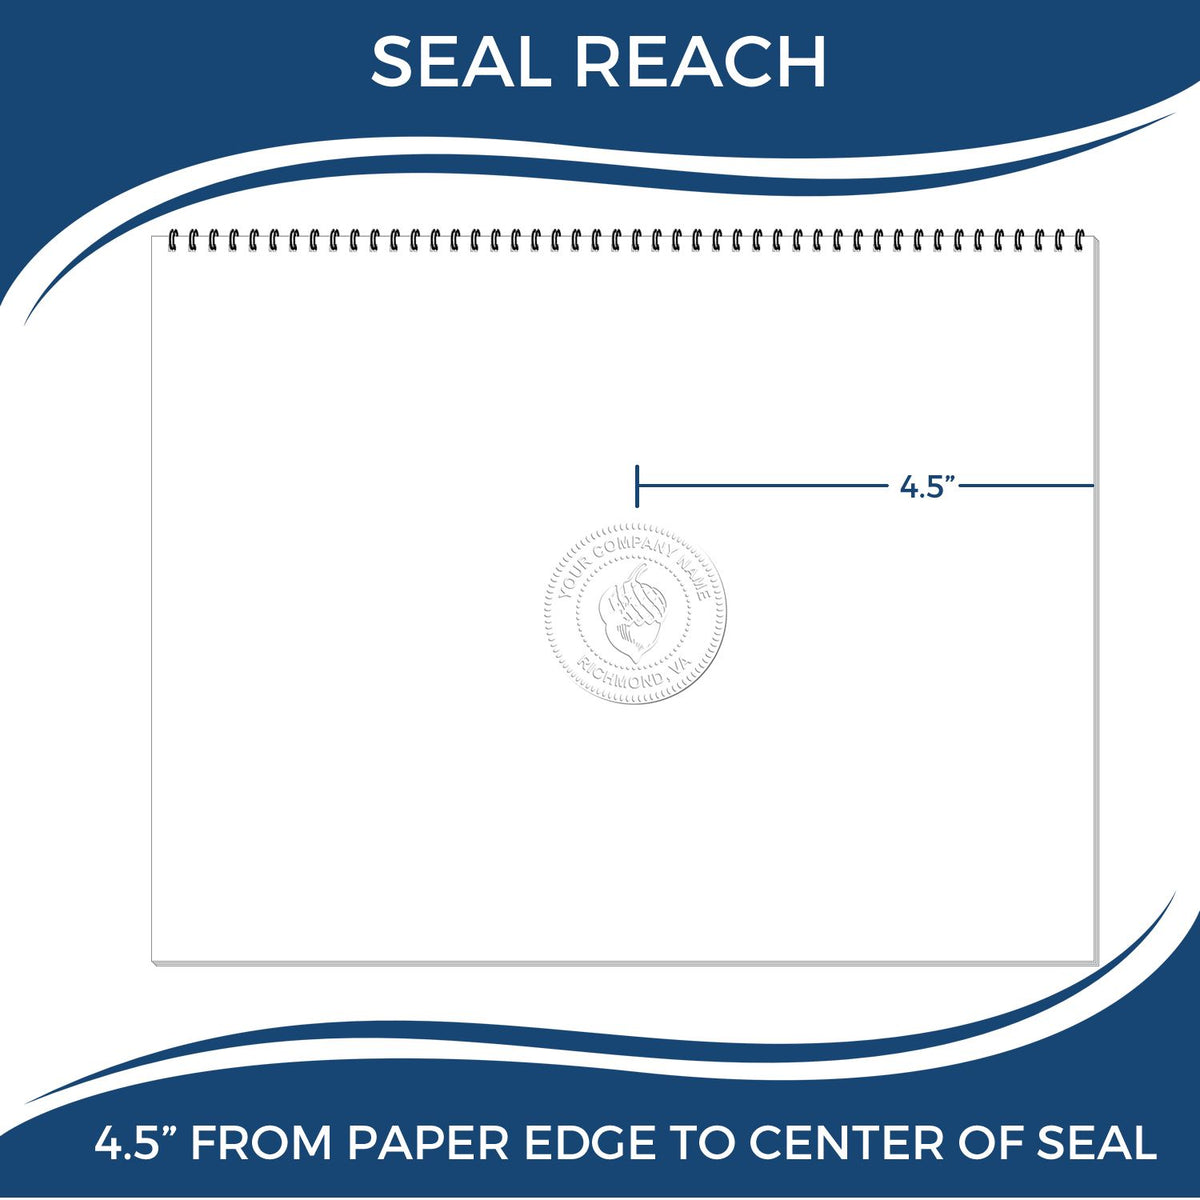 An infographic showing the seal reach which is represented by a ruler and a miniature seal image of the Extended Long Reach Missouri Surveyor Embosser